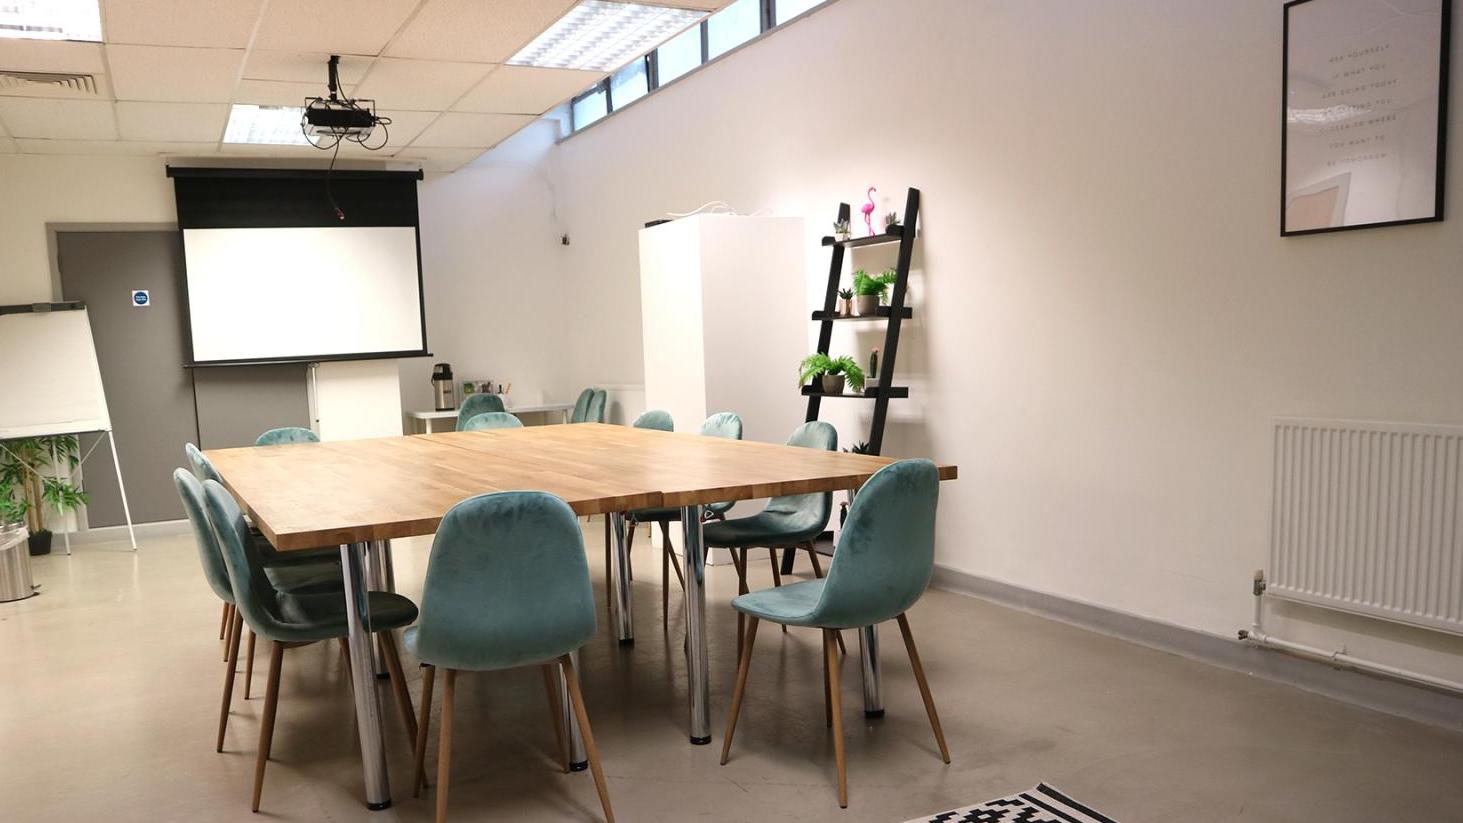 Find your Meeting Room in Shoreditch, London